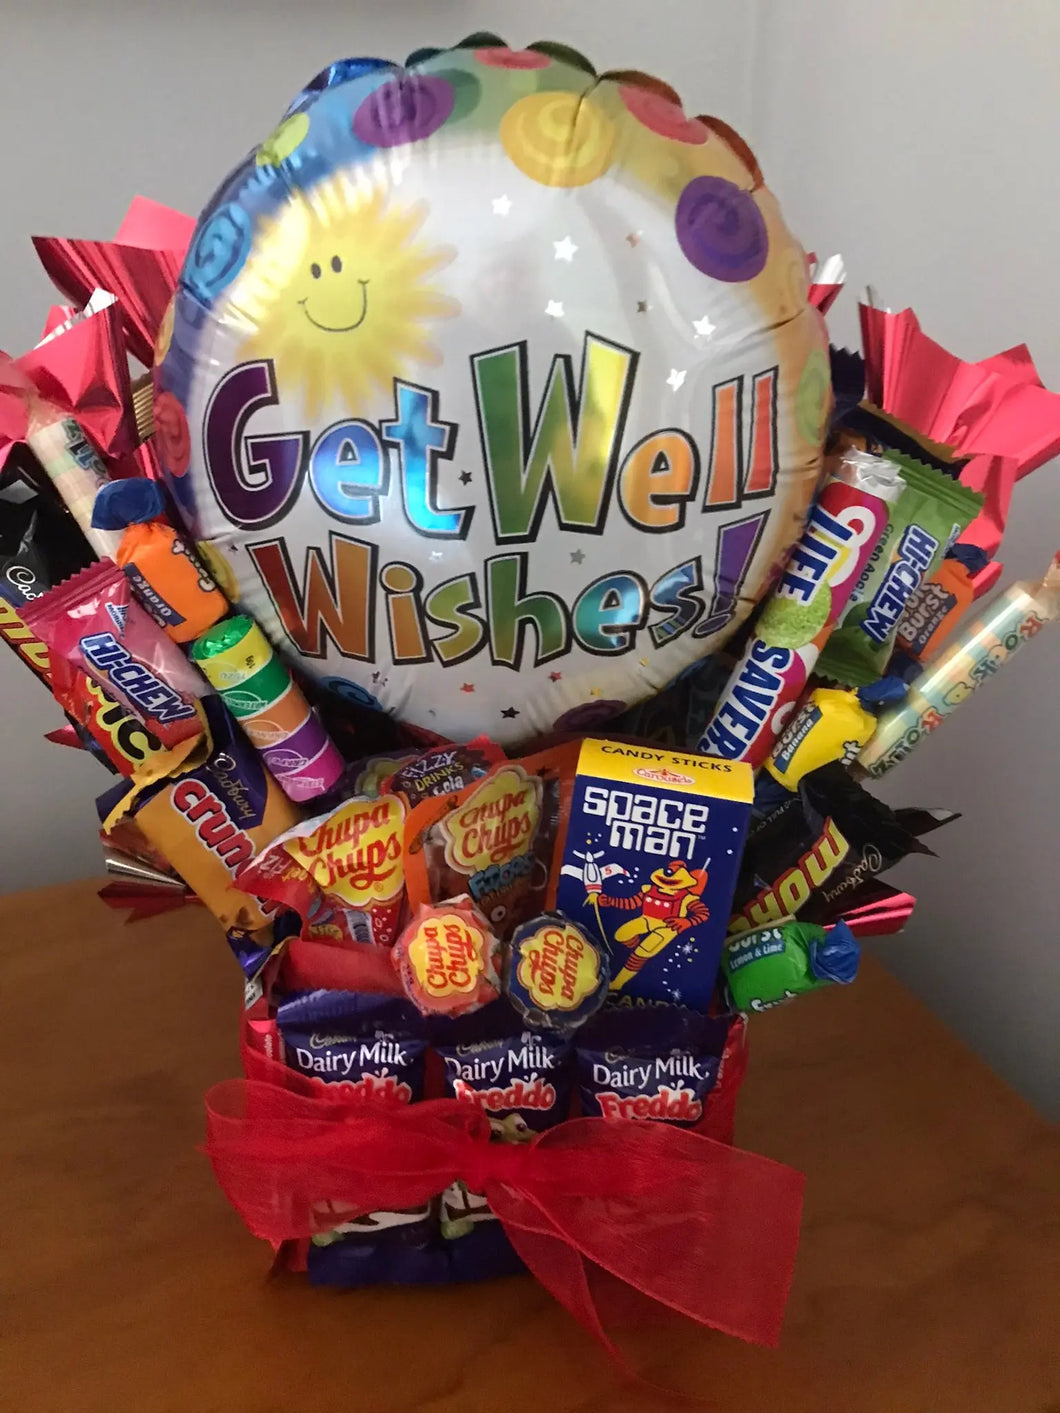 Get well wishes balloon bouquet - Image #1